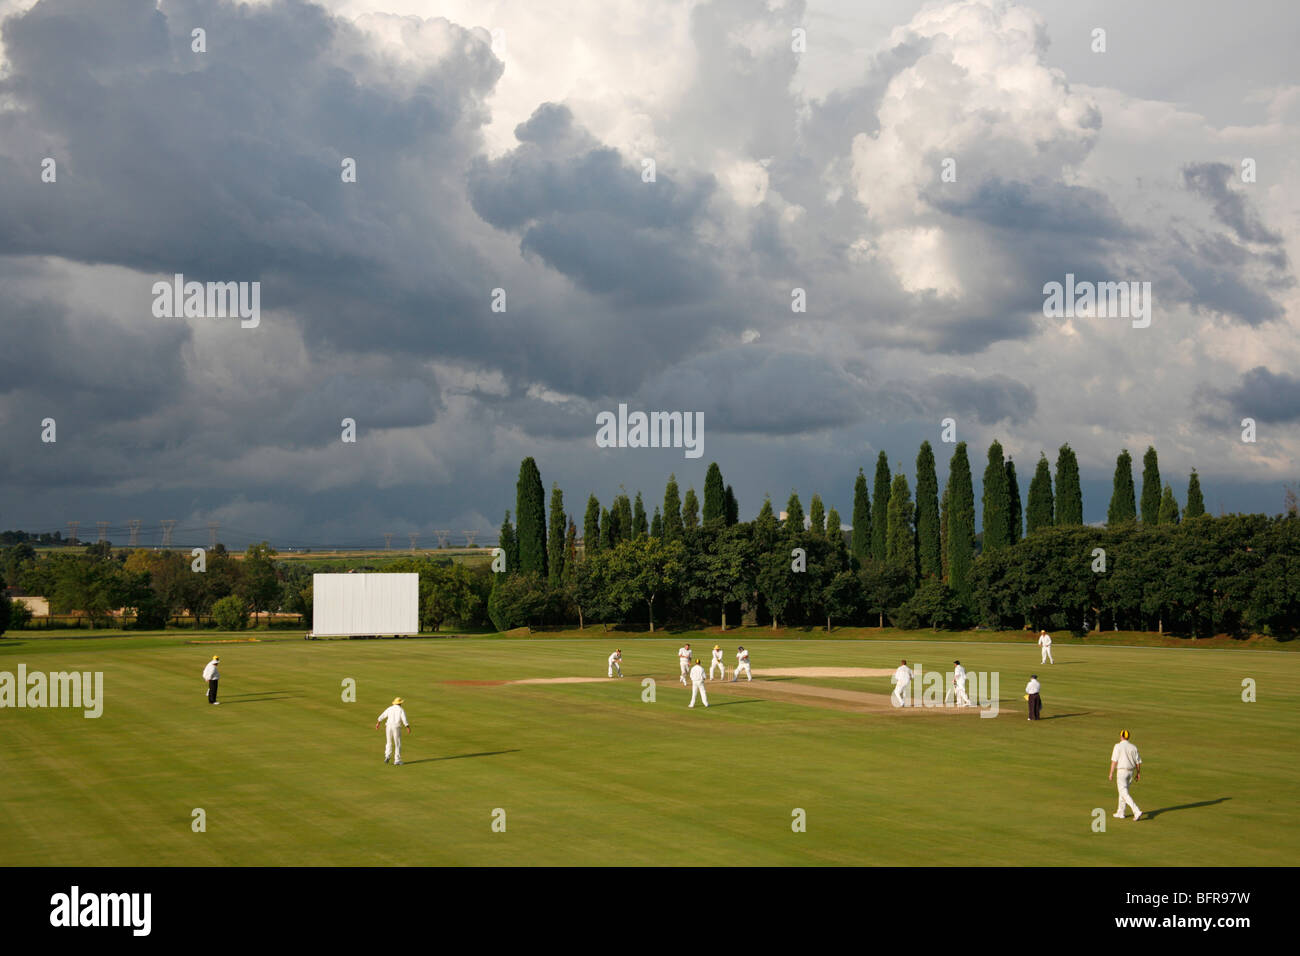 A game of cricket being played at Raindjiesfontein with an approaching summer storm Stock Photo